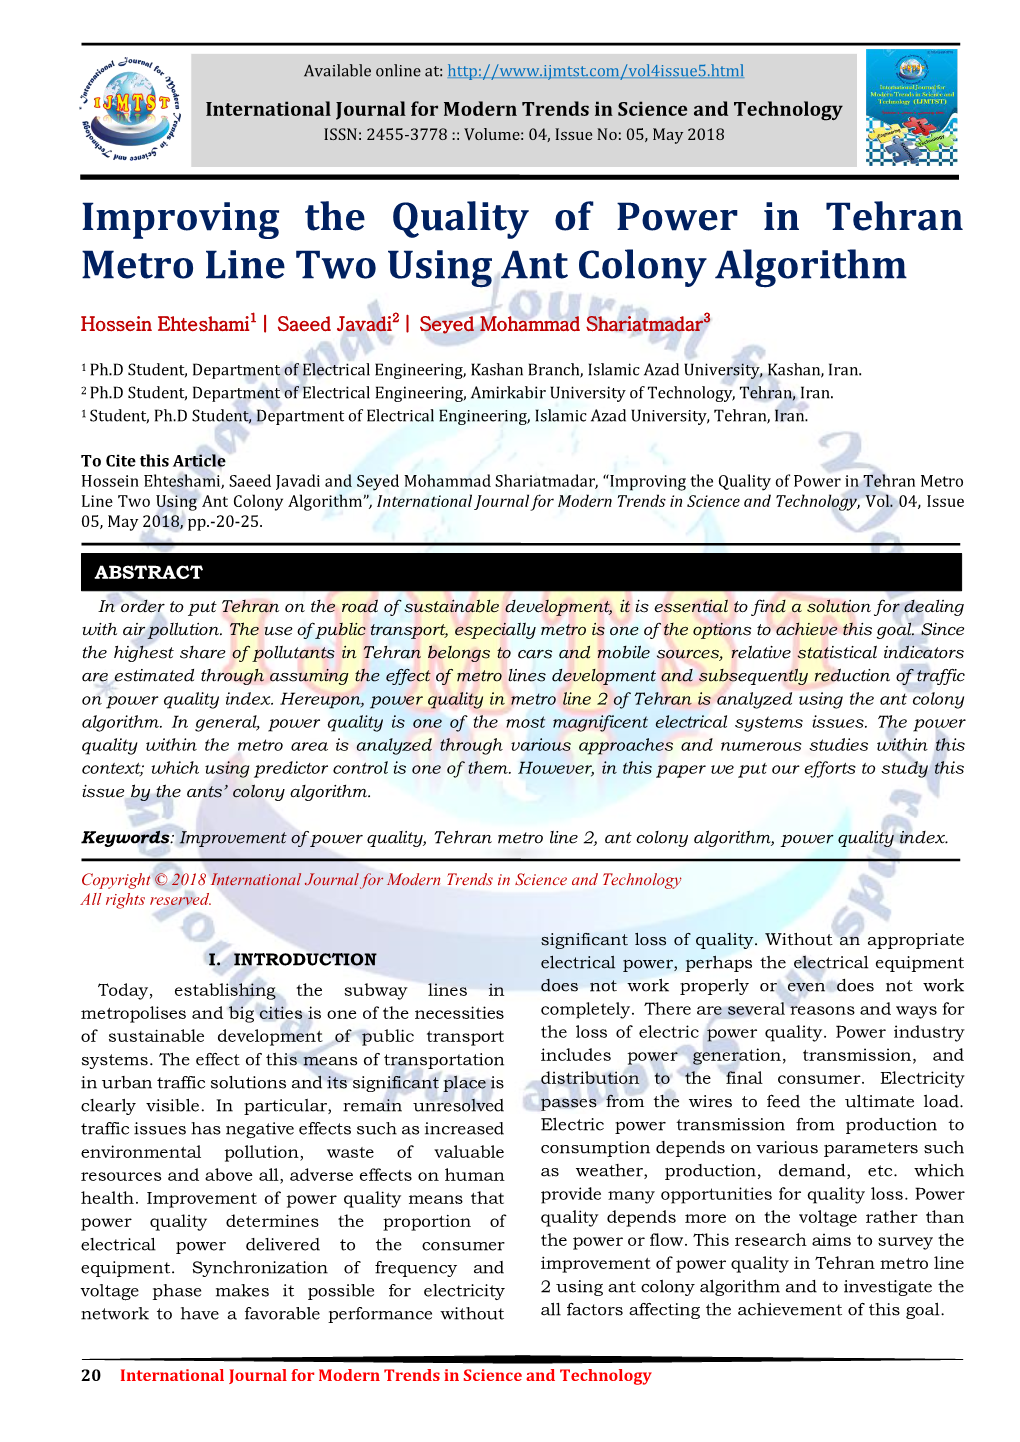 Improving the Quality of Power in Tehran Metro Line Two Using Ant Colony Algorithm